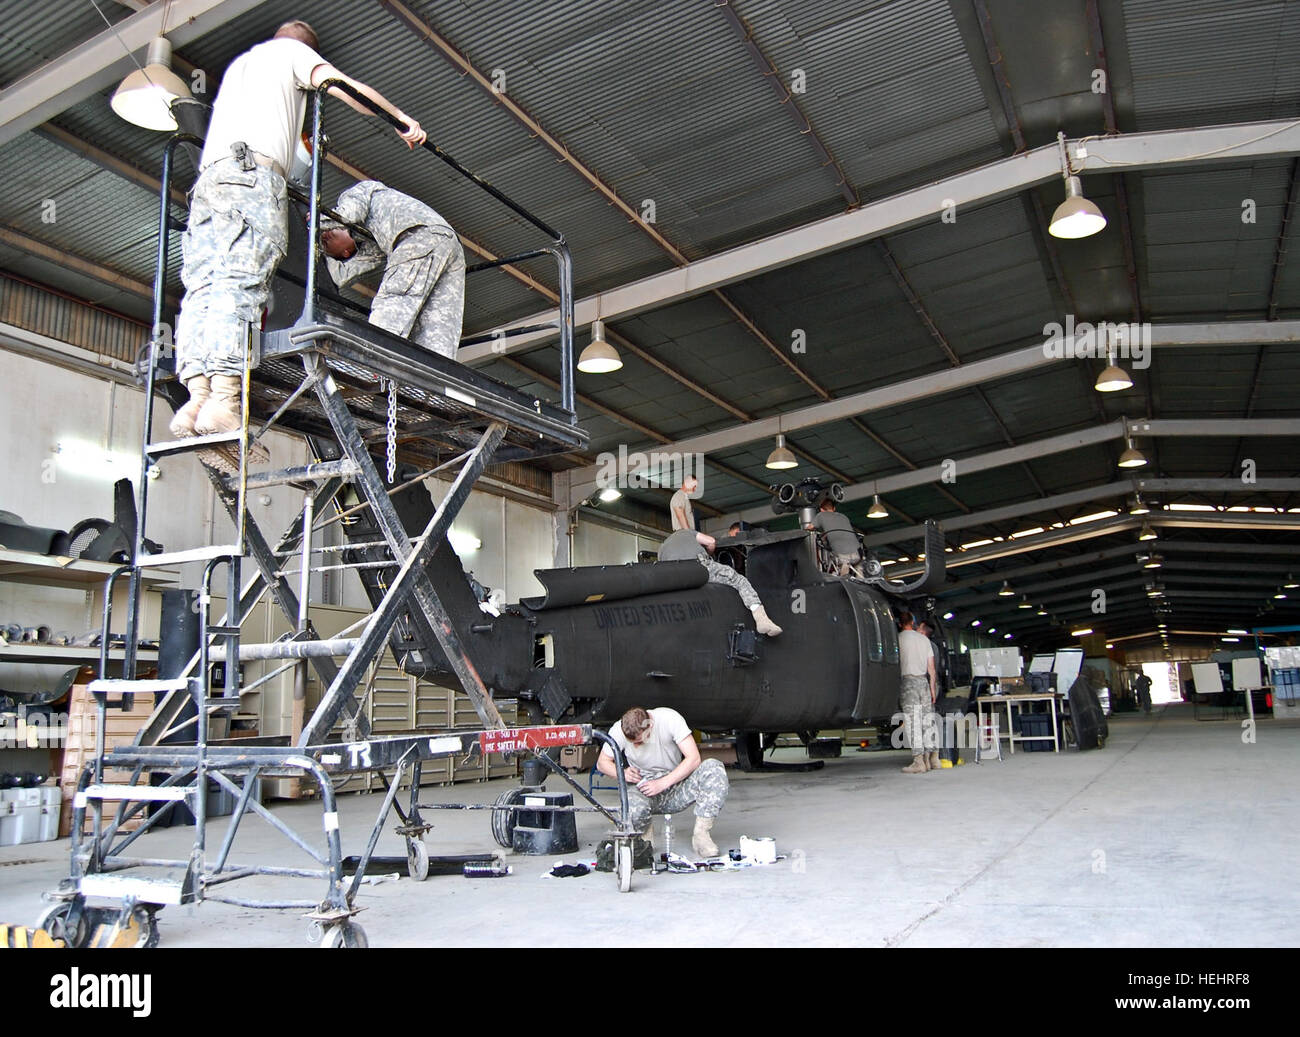 Soldiers from Company B, 404th Aviation Support Battalion, Combat Aviation Brigade, 4th Infantry Division, Multi-National Division - Baghdad, perform phase maintenance on a UH-60 Blackhawk helicopter at Camp Taji March 5. Once an aircraft is scheduled for phase maintenance it is brought in to the company's service bay, it is stripped down, critical parts are inspected for wear and tear and worn or broken parts are replaced or repaired. Phase maintenance professionals keep helicopters flying high 168427 Stock Photo